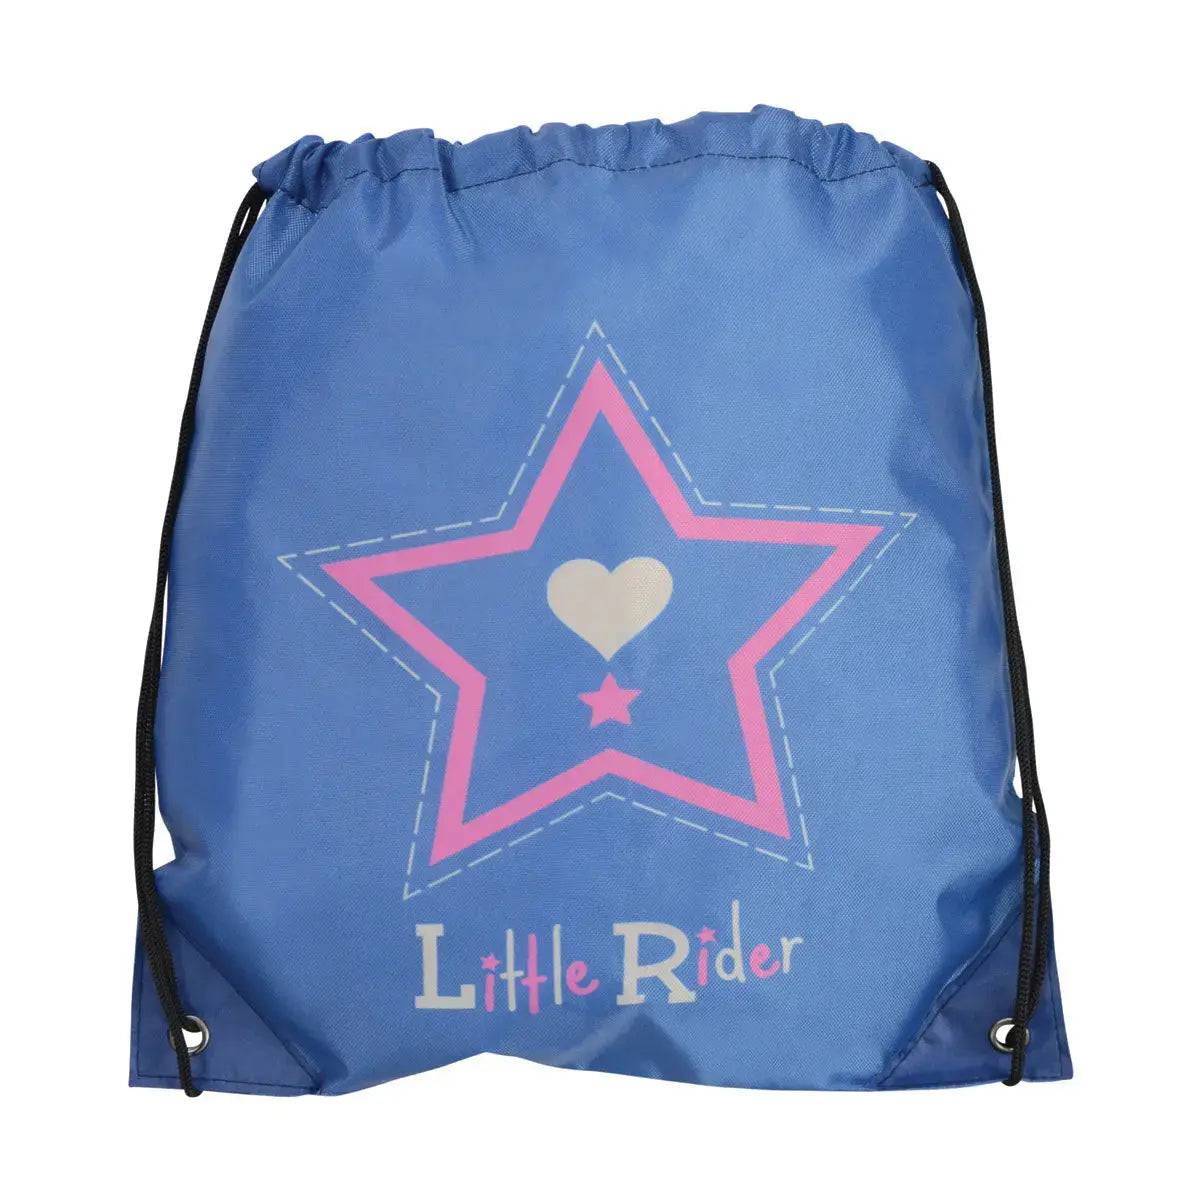 Riding Star Drawstring Bag by Little Rider Deep Water Blue HY Equestrian Grooming Bags, Boxes & Kits Barnstaple Equestrian Supplies